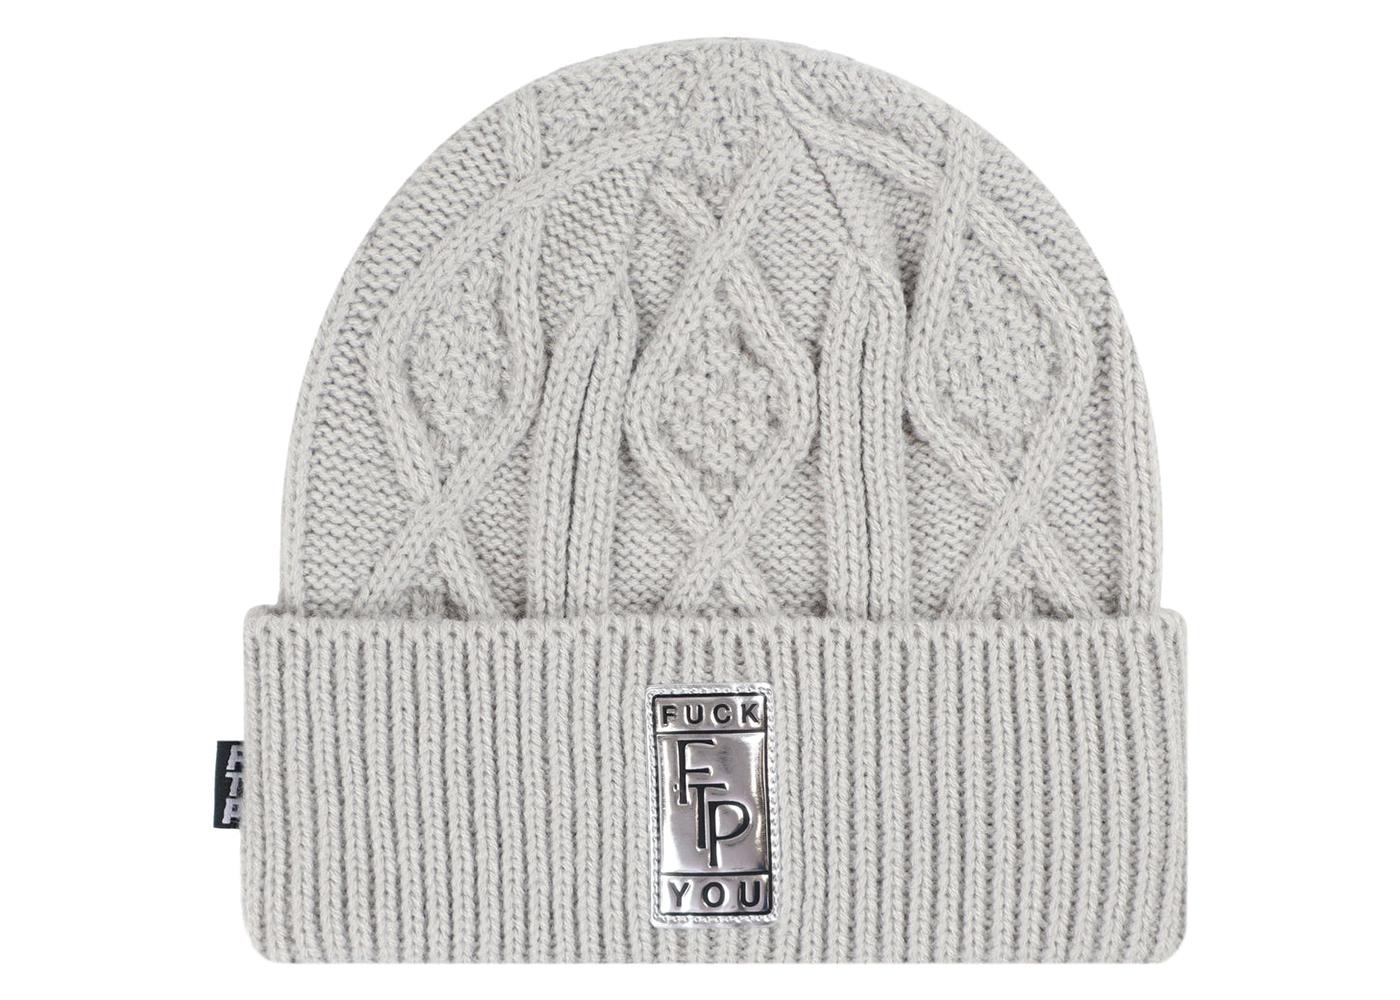 FTP Big Body Cable Knit Beanie Heather Grey